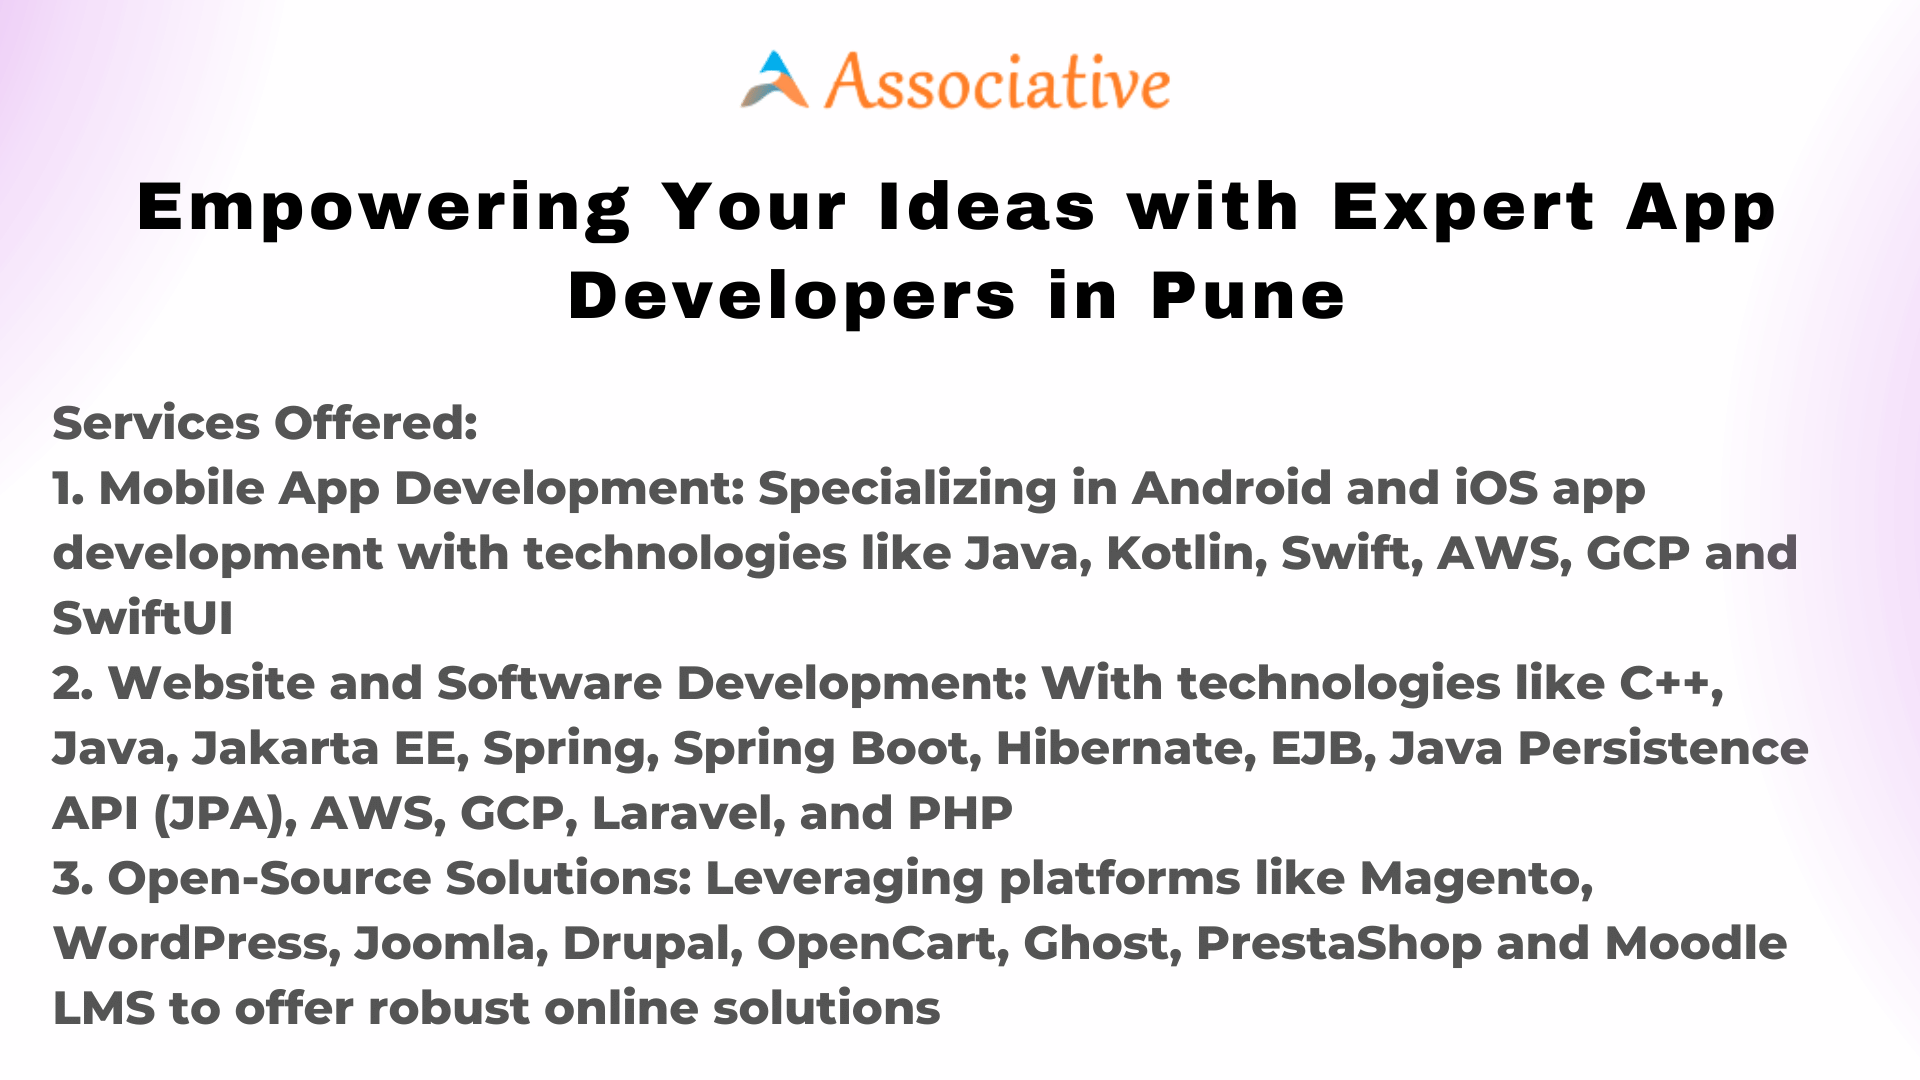 Empowering Your Ideas with Expert App Developers in Pune